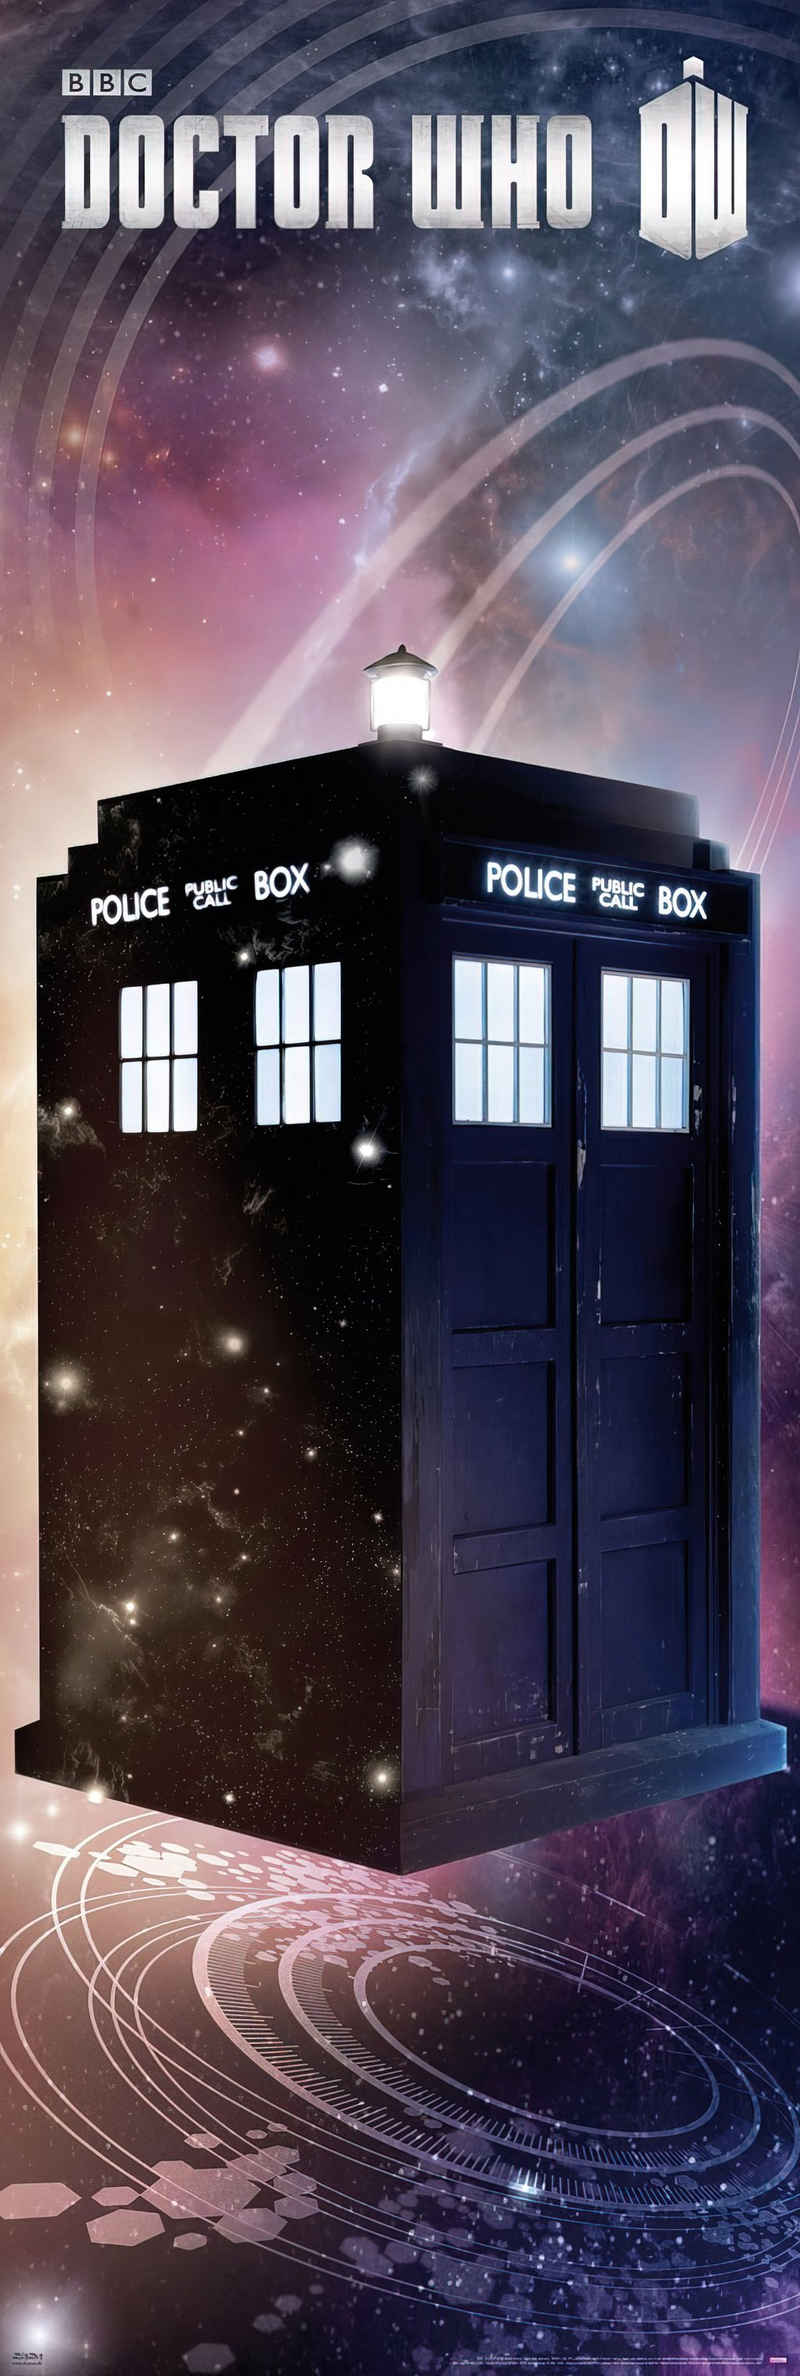 Doctor Who Poster Doctor Who Poster Tardis 53 x 158 cm